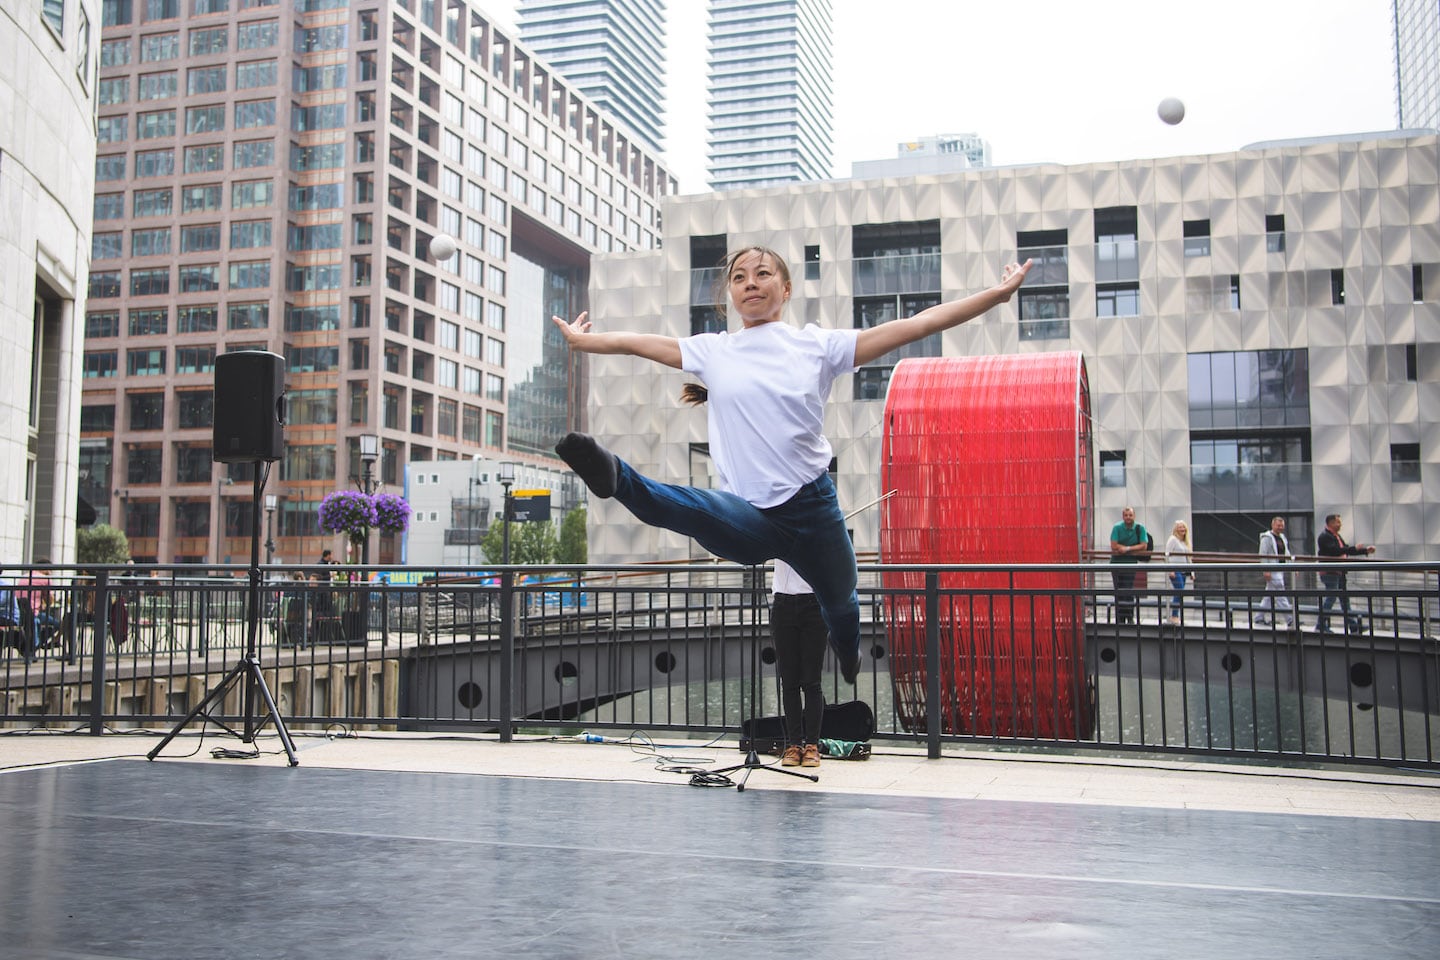 Against a backdrop of tall city buildings, a dancer leaps high in the air towards us